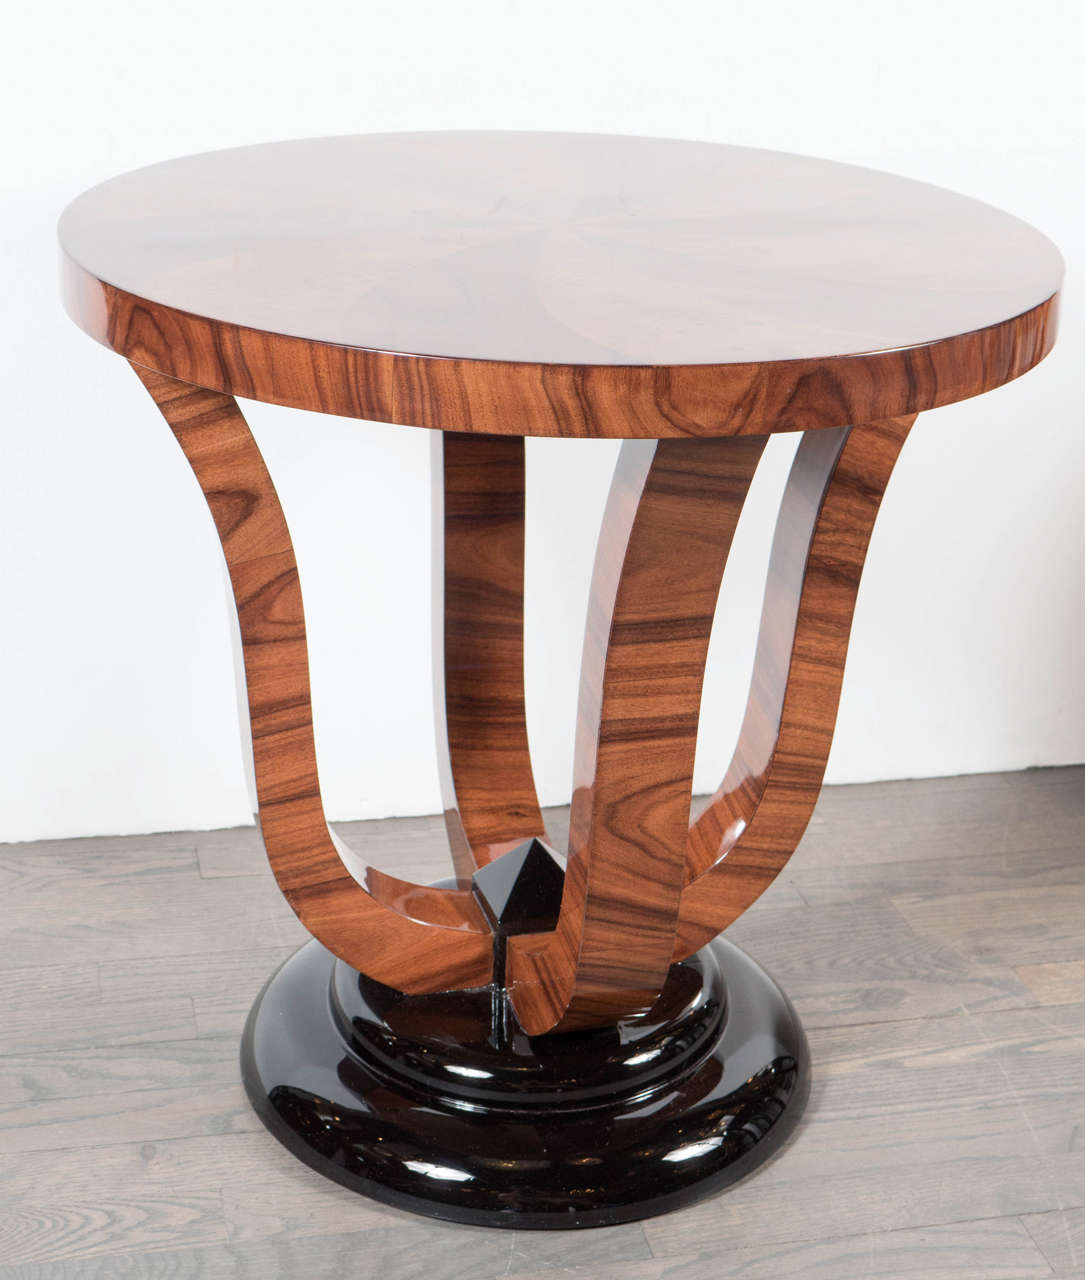 Pair of exquisite Art Deco Gueridon occasional tables in bookmatched walnut, burled Carpathian elm and black lacquer bases. These stunning tables feature tops that showcase exotic flamed walnut and bookmatched burled Carpathian elm that once